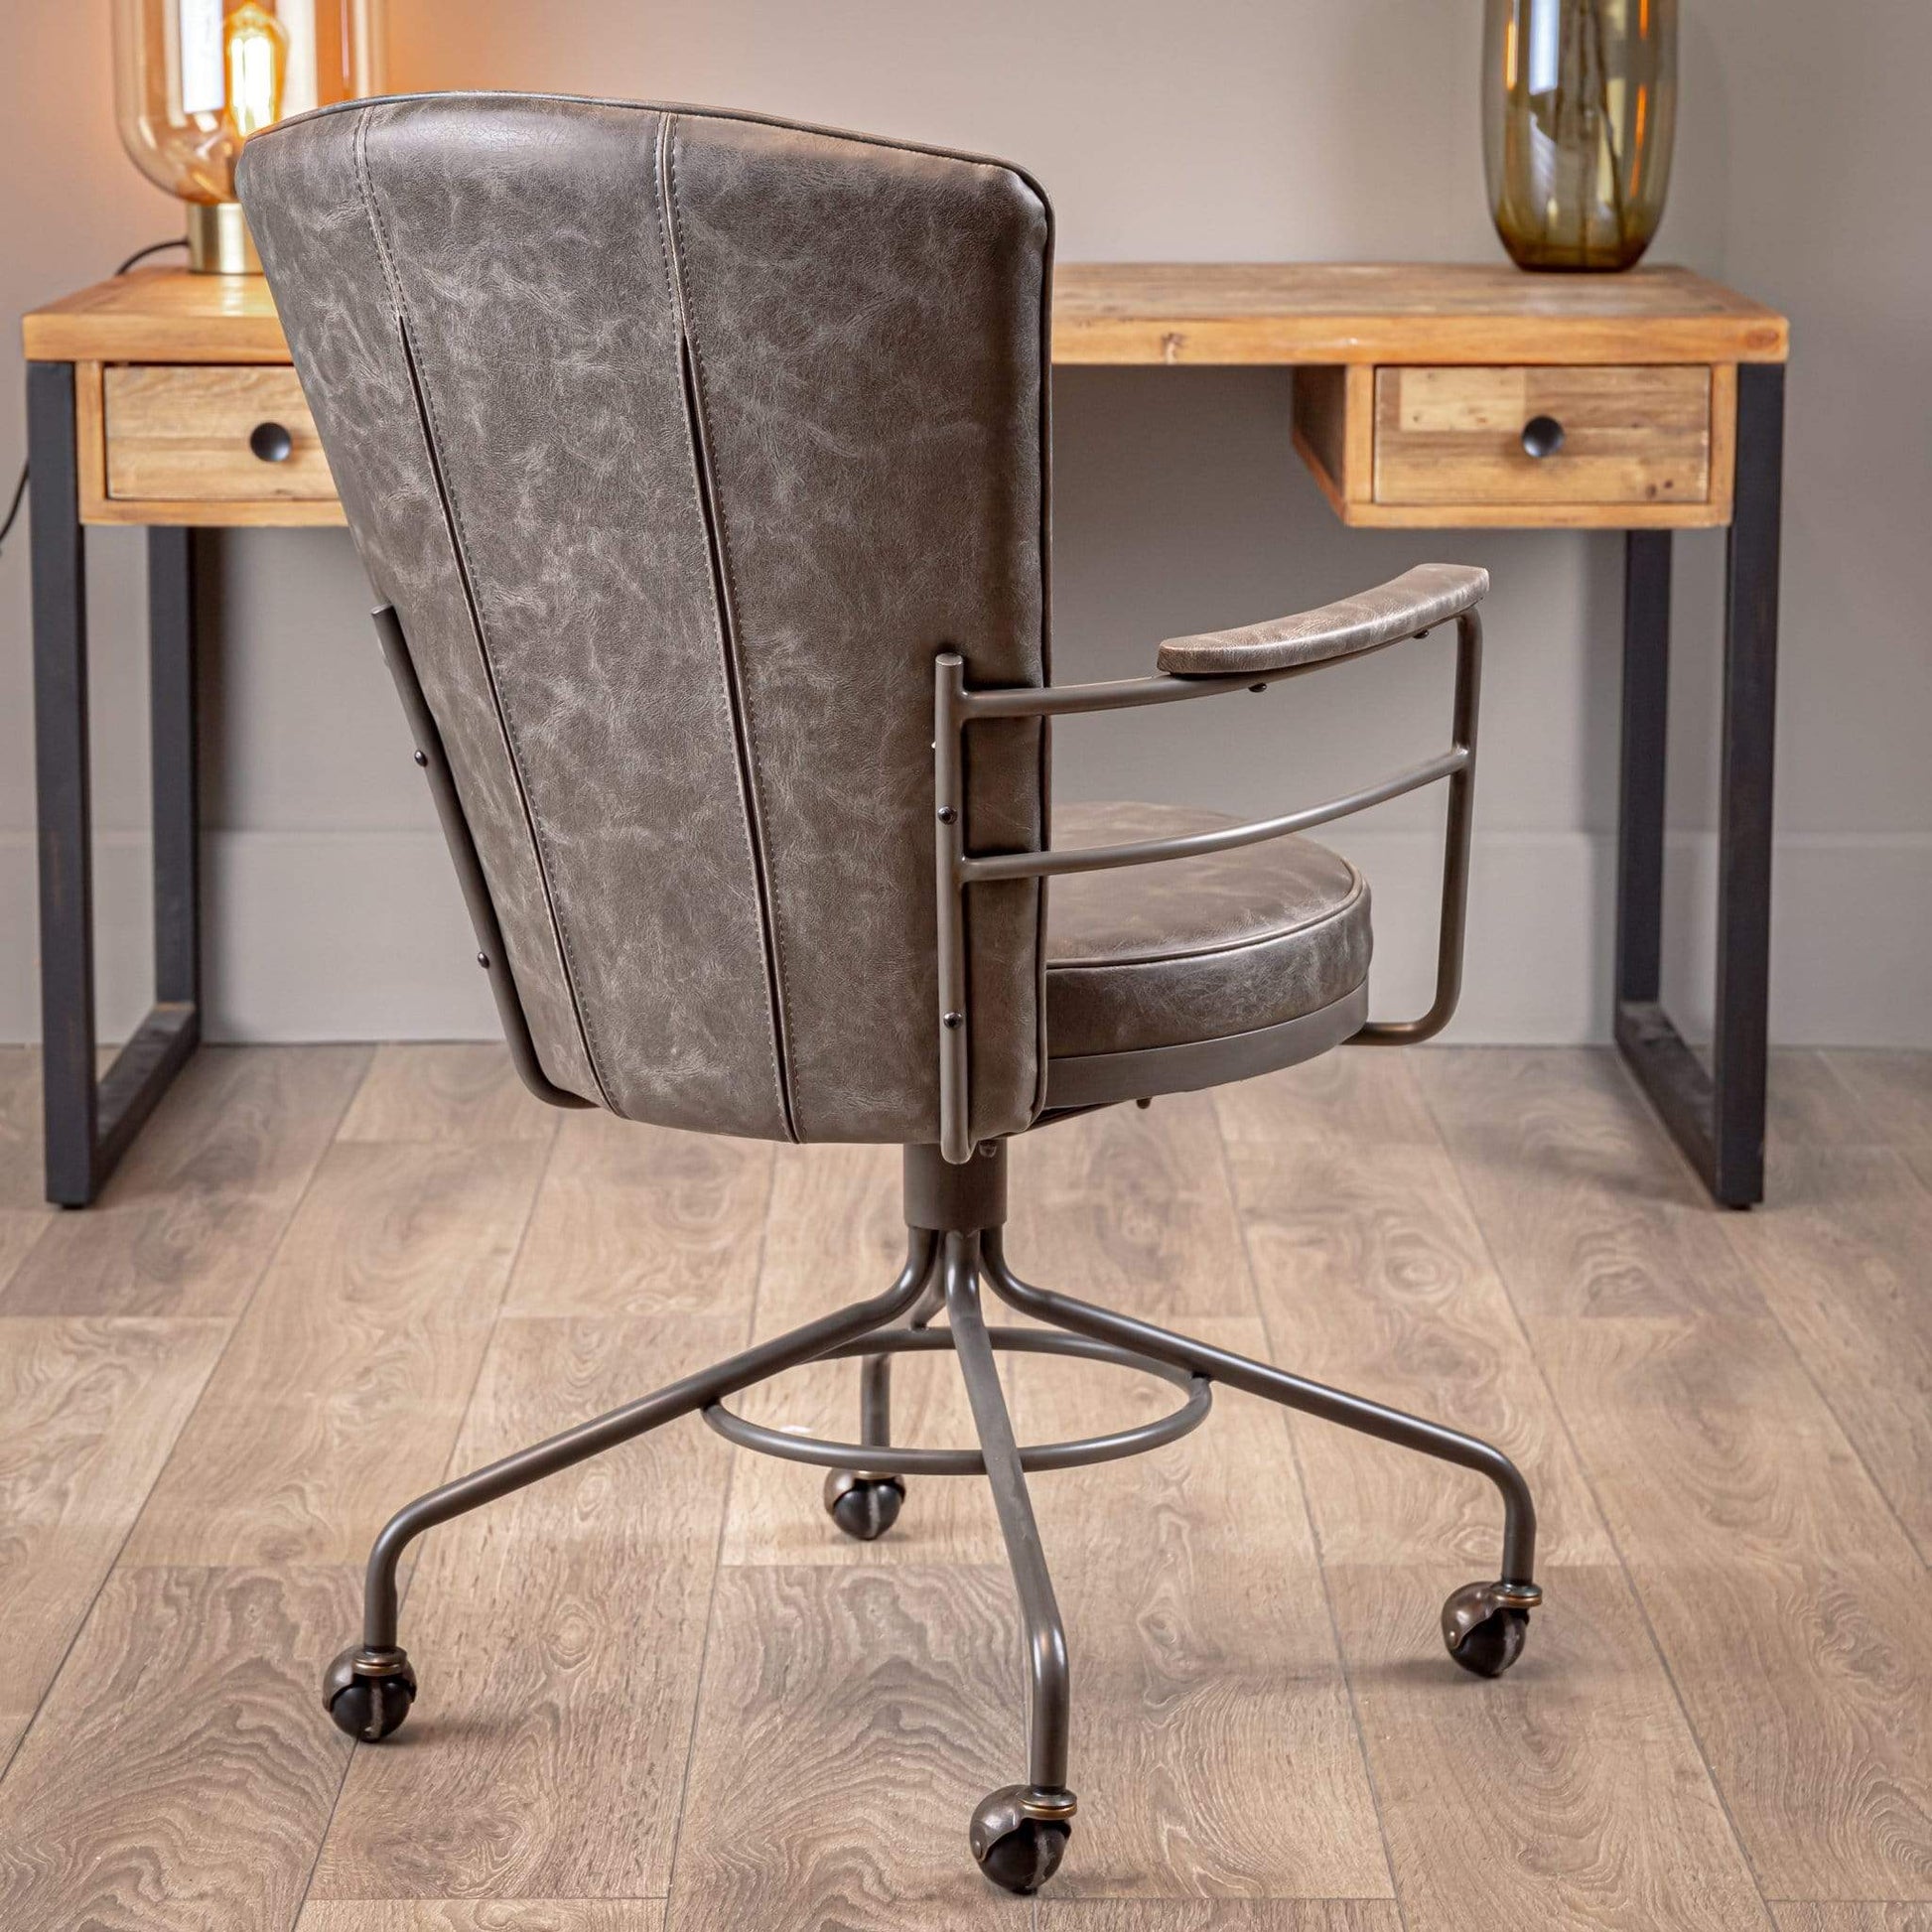 Furniture  -  Hue Black Leather Office Chair  -  50150679